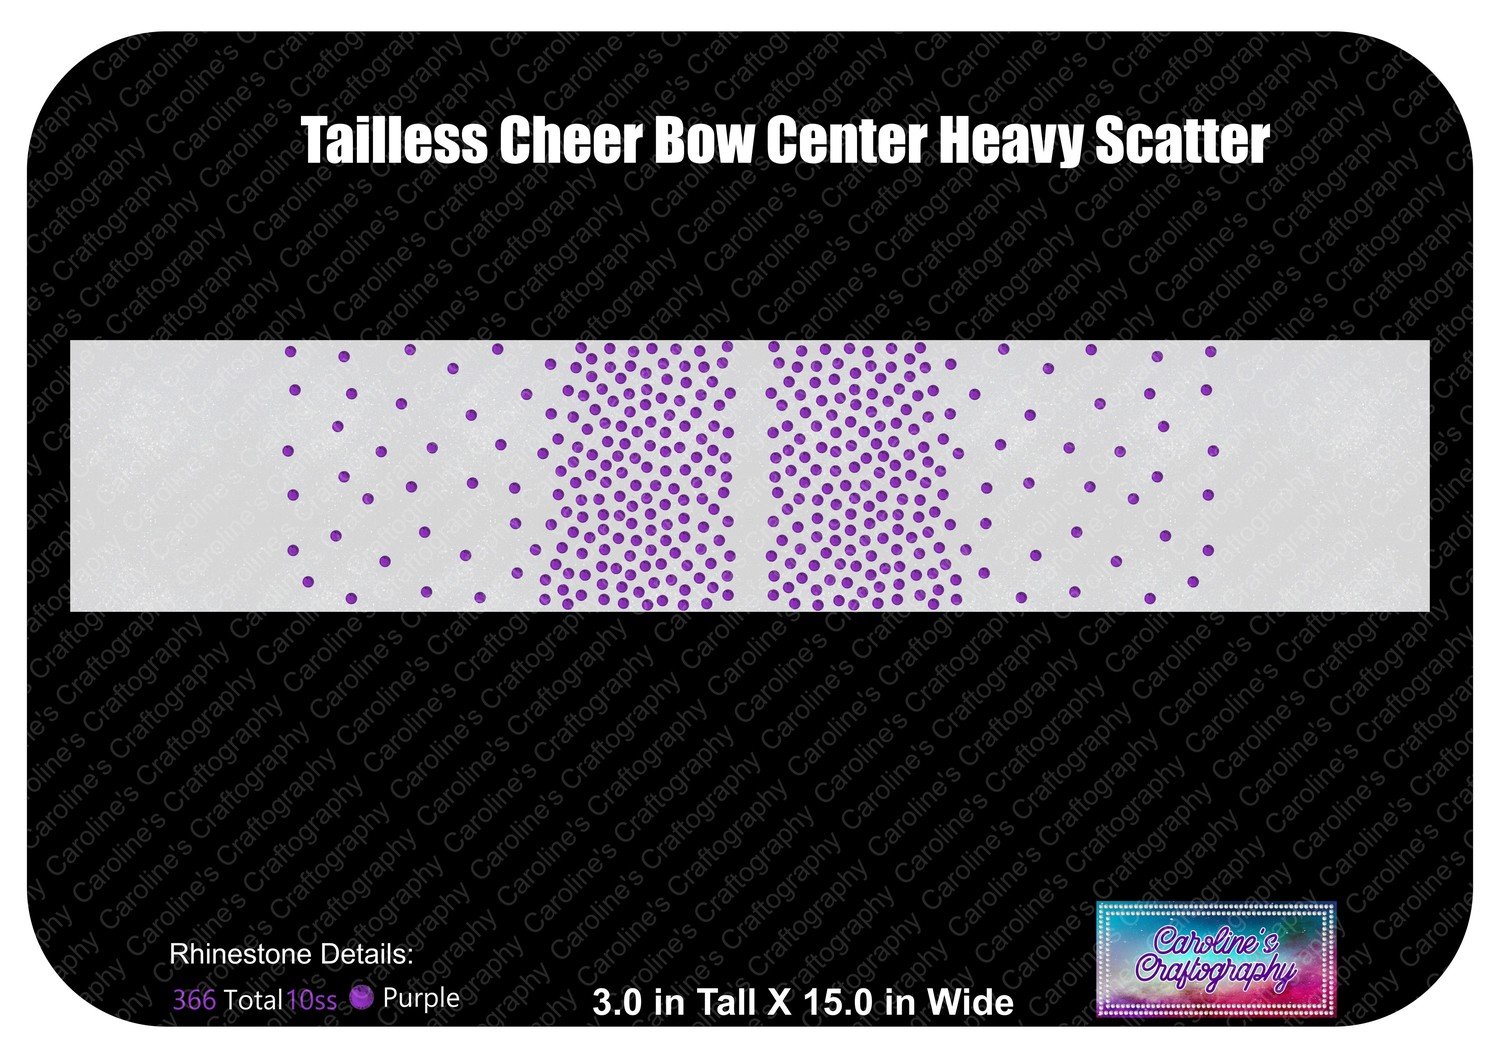 Tailless Cheer Bow Center Heavy Scatter